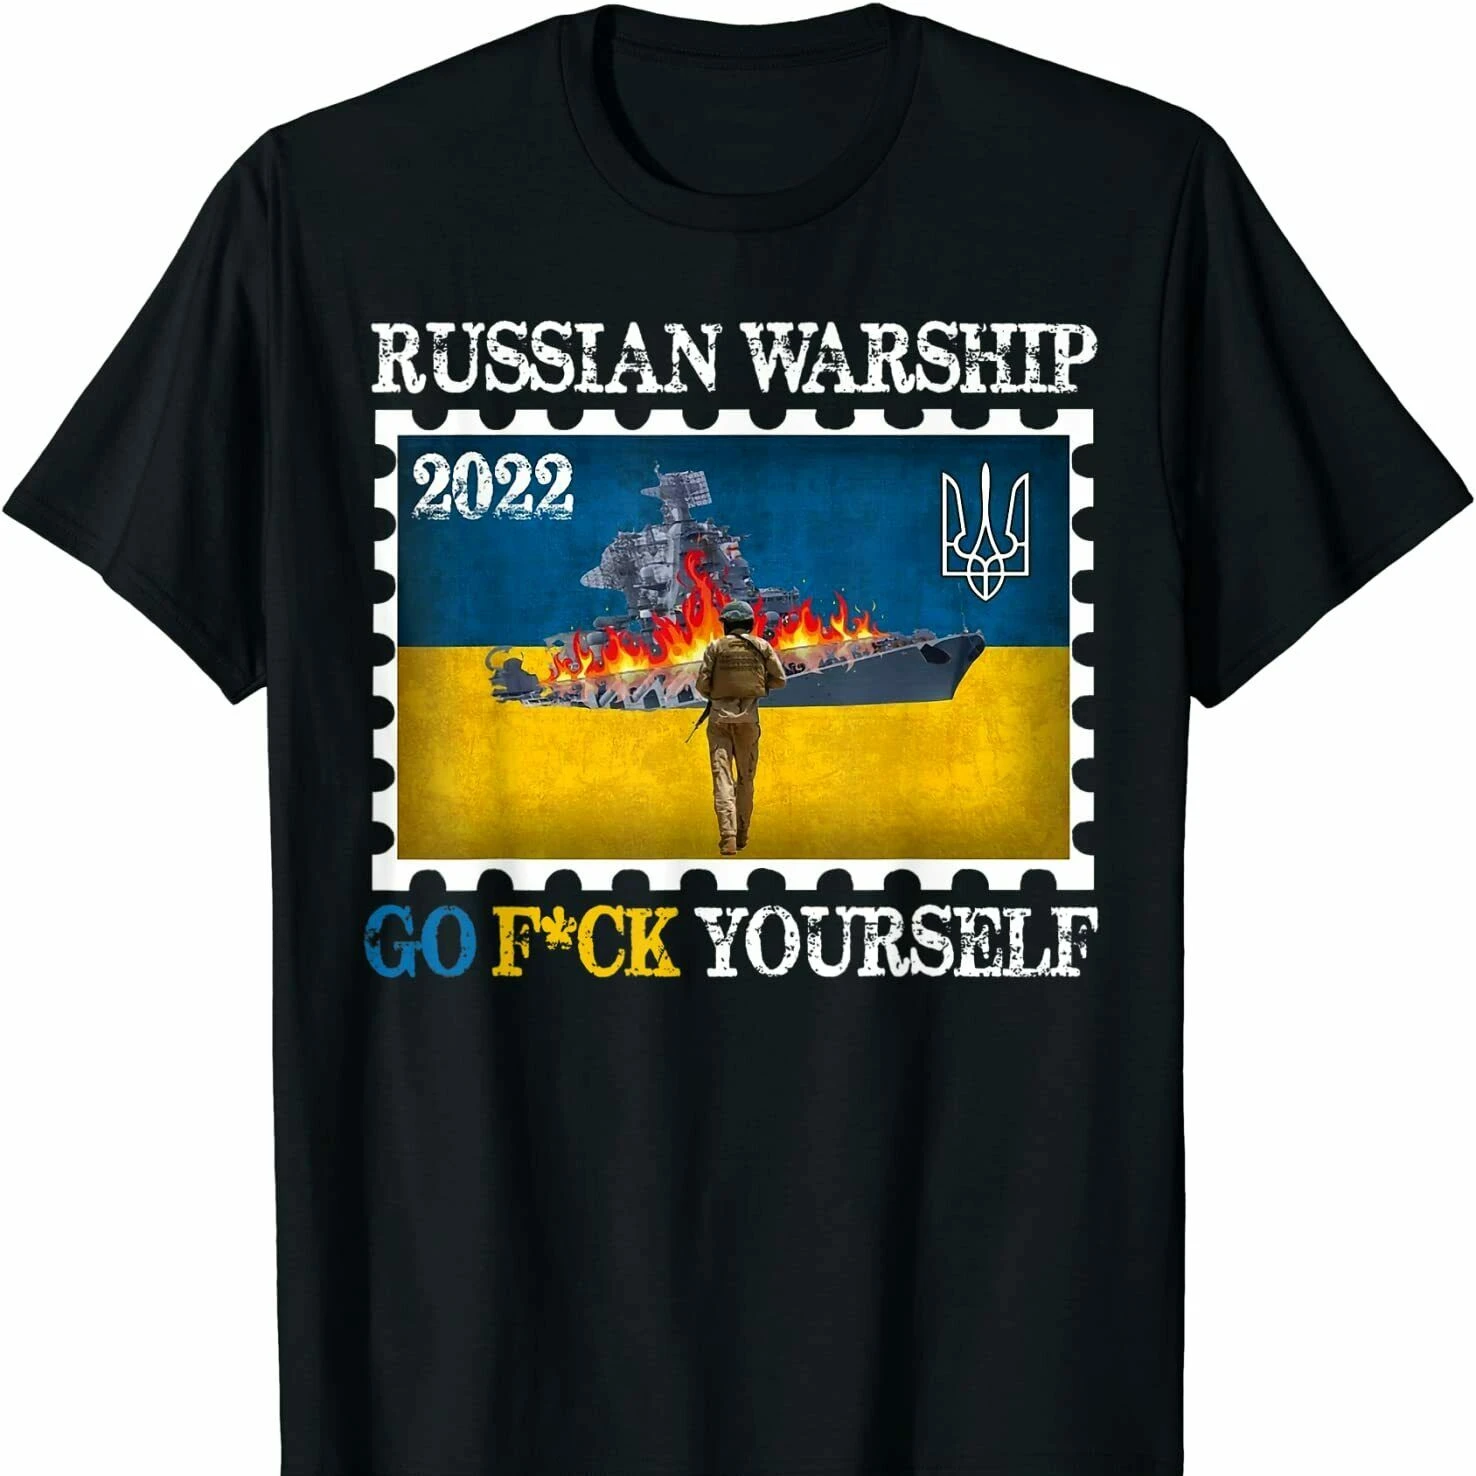 

The Sunken Warship 2022 Ukraine Postage Stamp Flag Pride T Shirt. Short Sleeve 100% Cotton Casual T-shirts Loose Top New